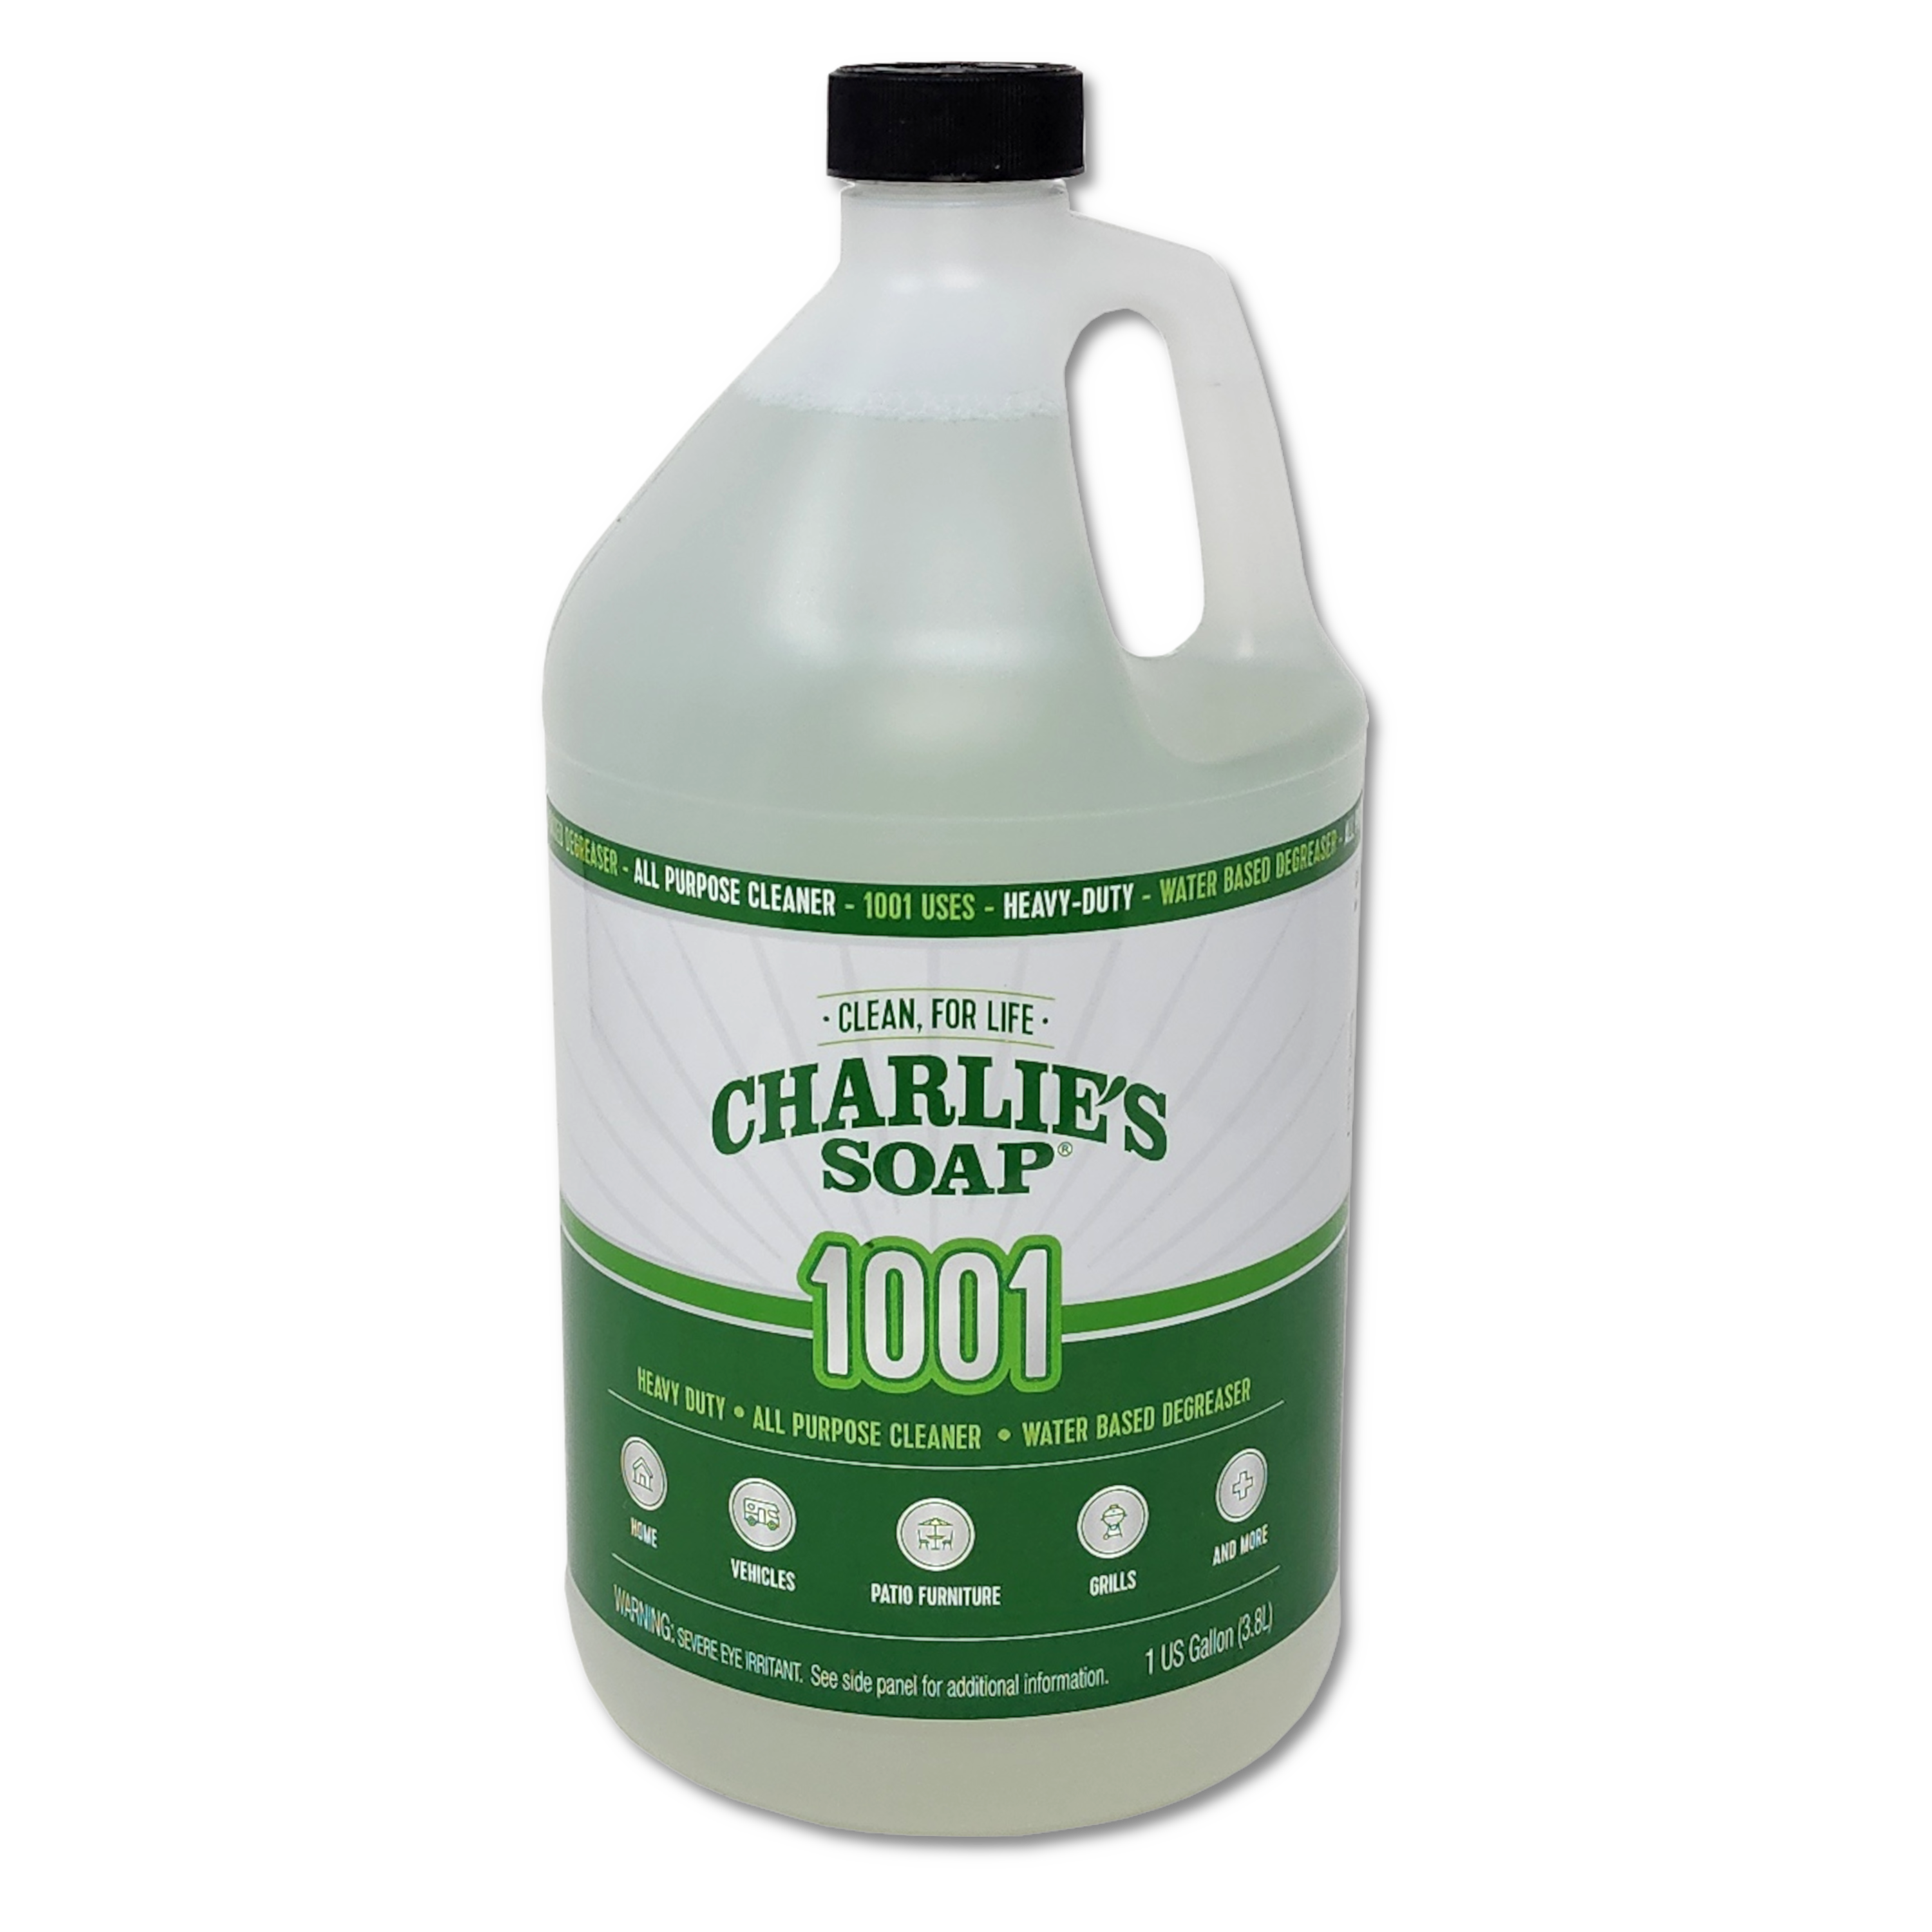 All-Purpose Cleaner Degreaser